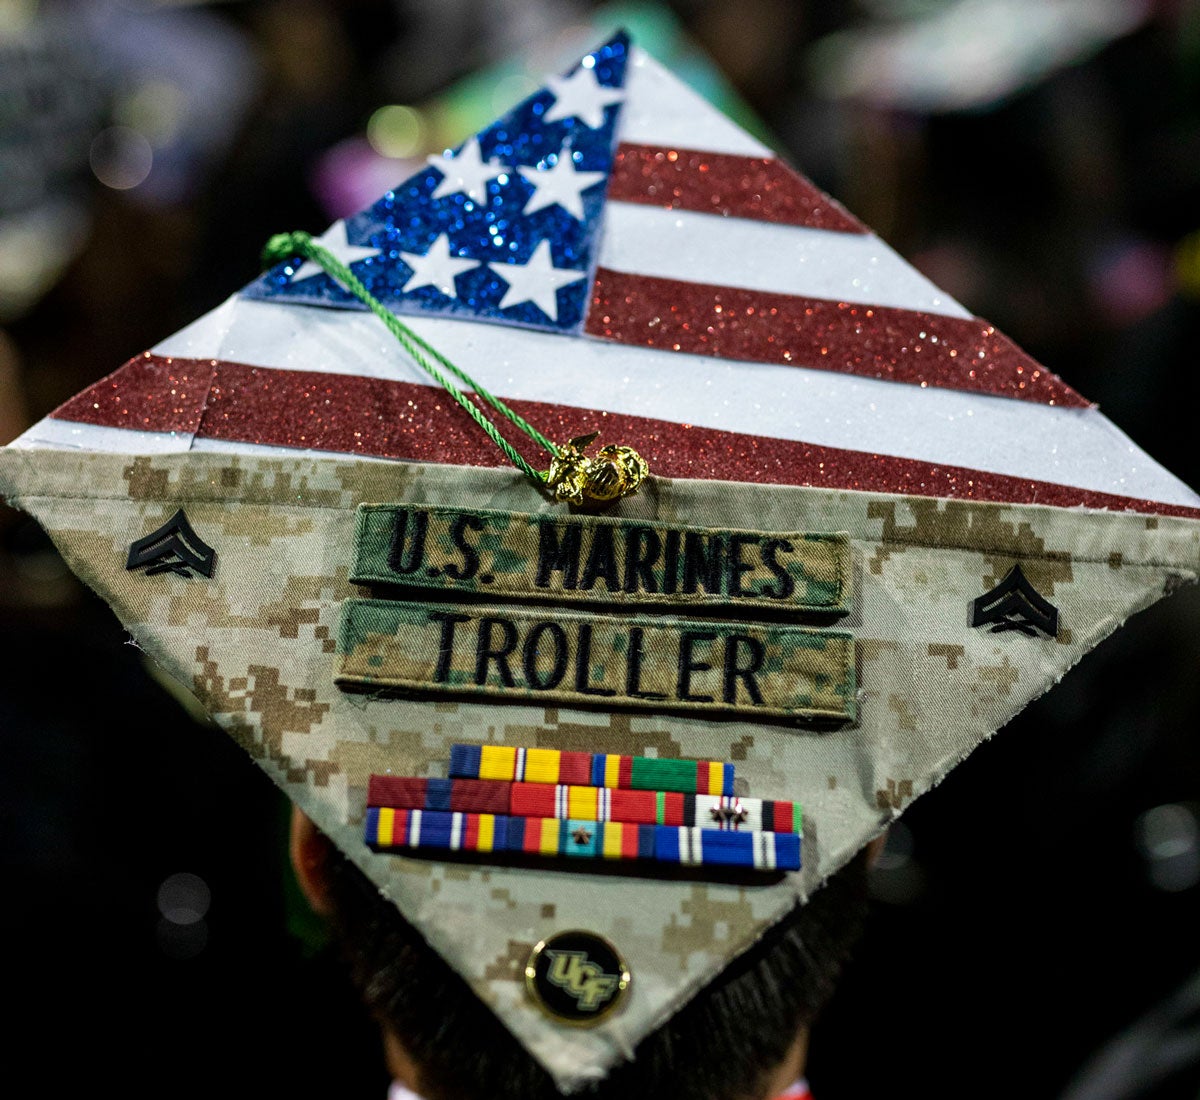 Graduation cap decorated with American flag and U.S Marines service ribbons